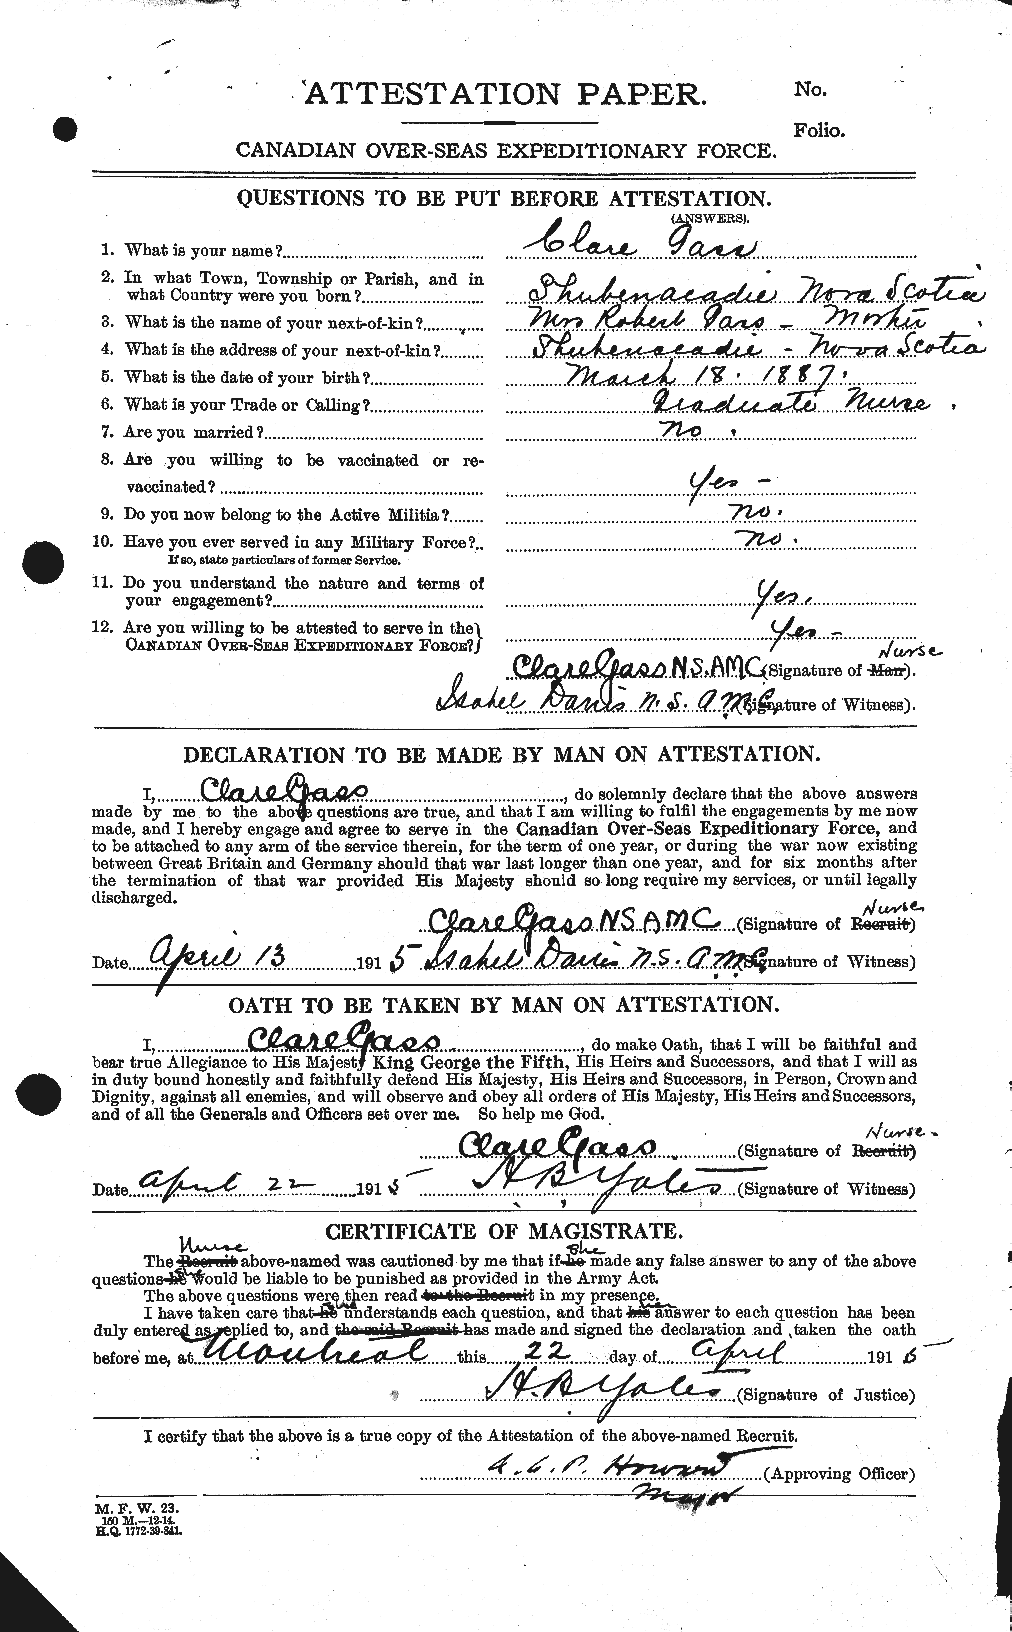 Personnel Records of the First World War - CEF 341600a